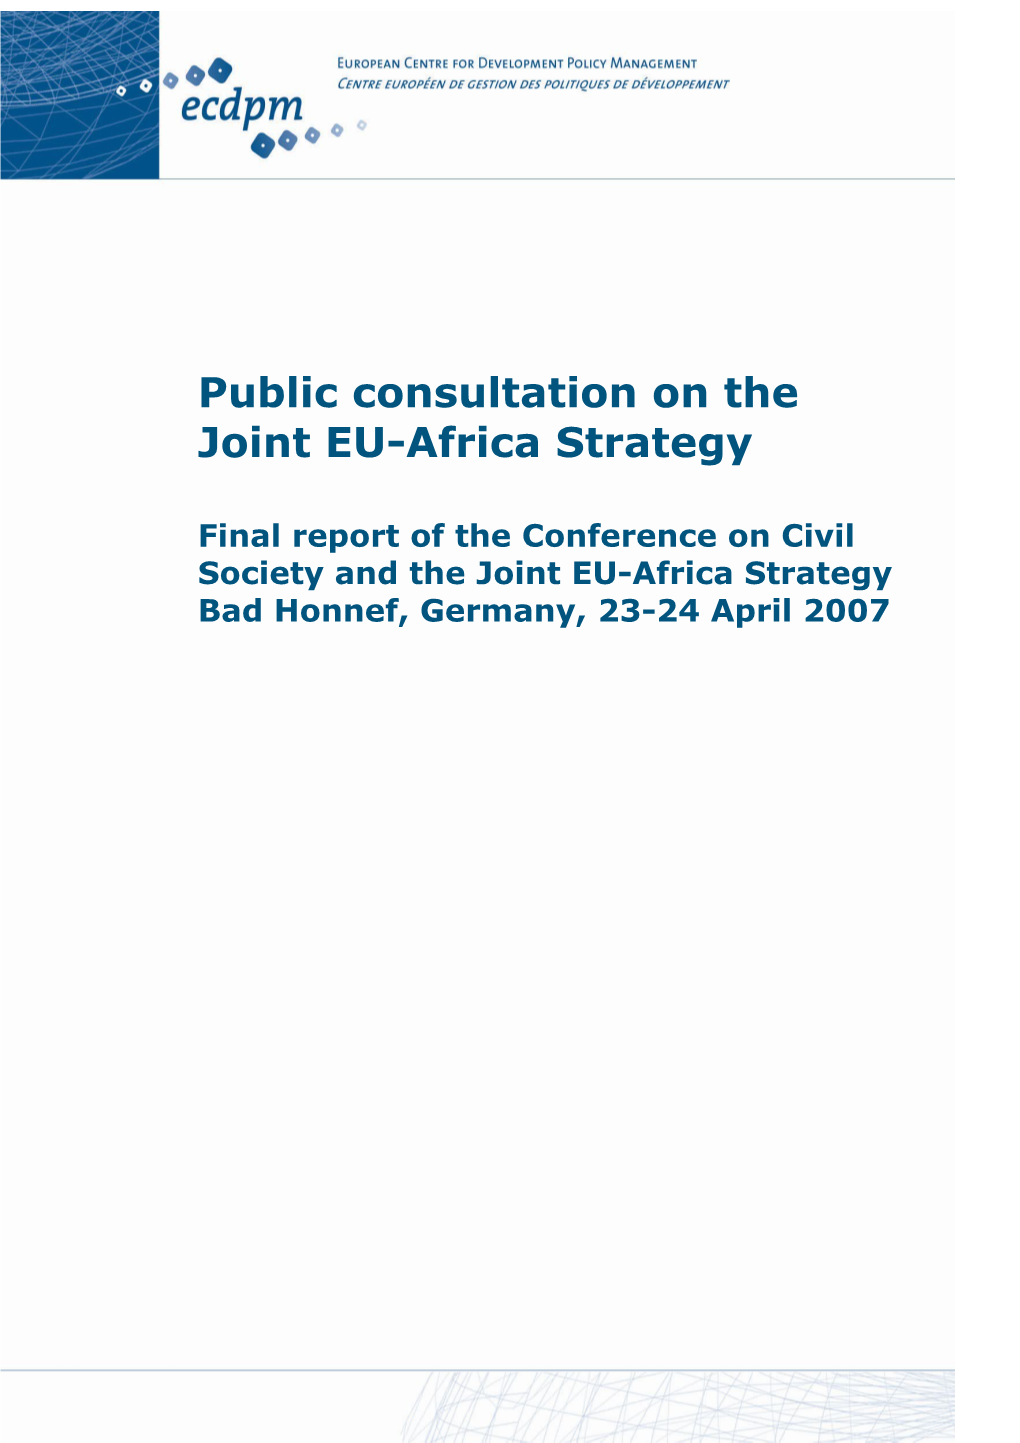 Final Report of the Conference on Civil Society and the Joint EU-Africa Strategy